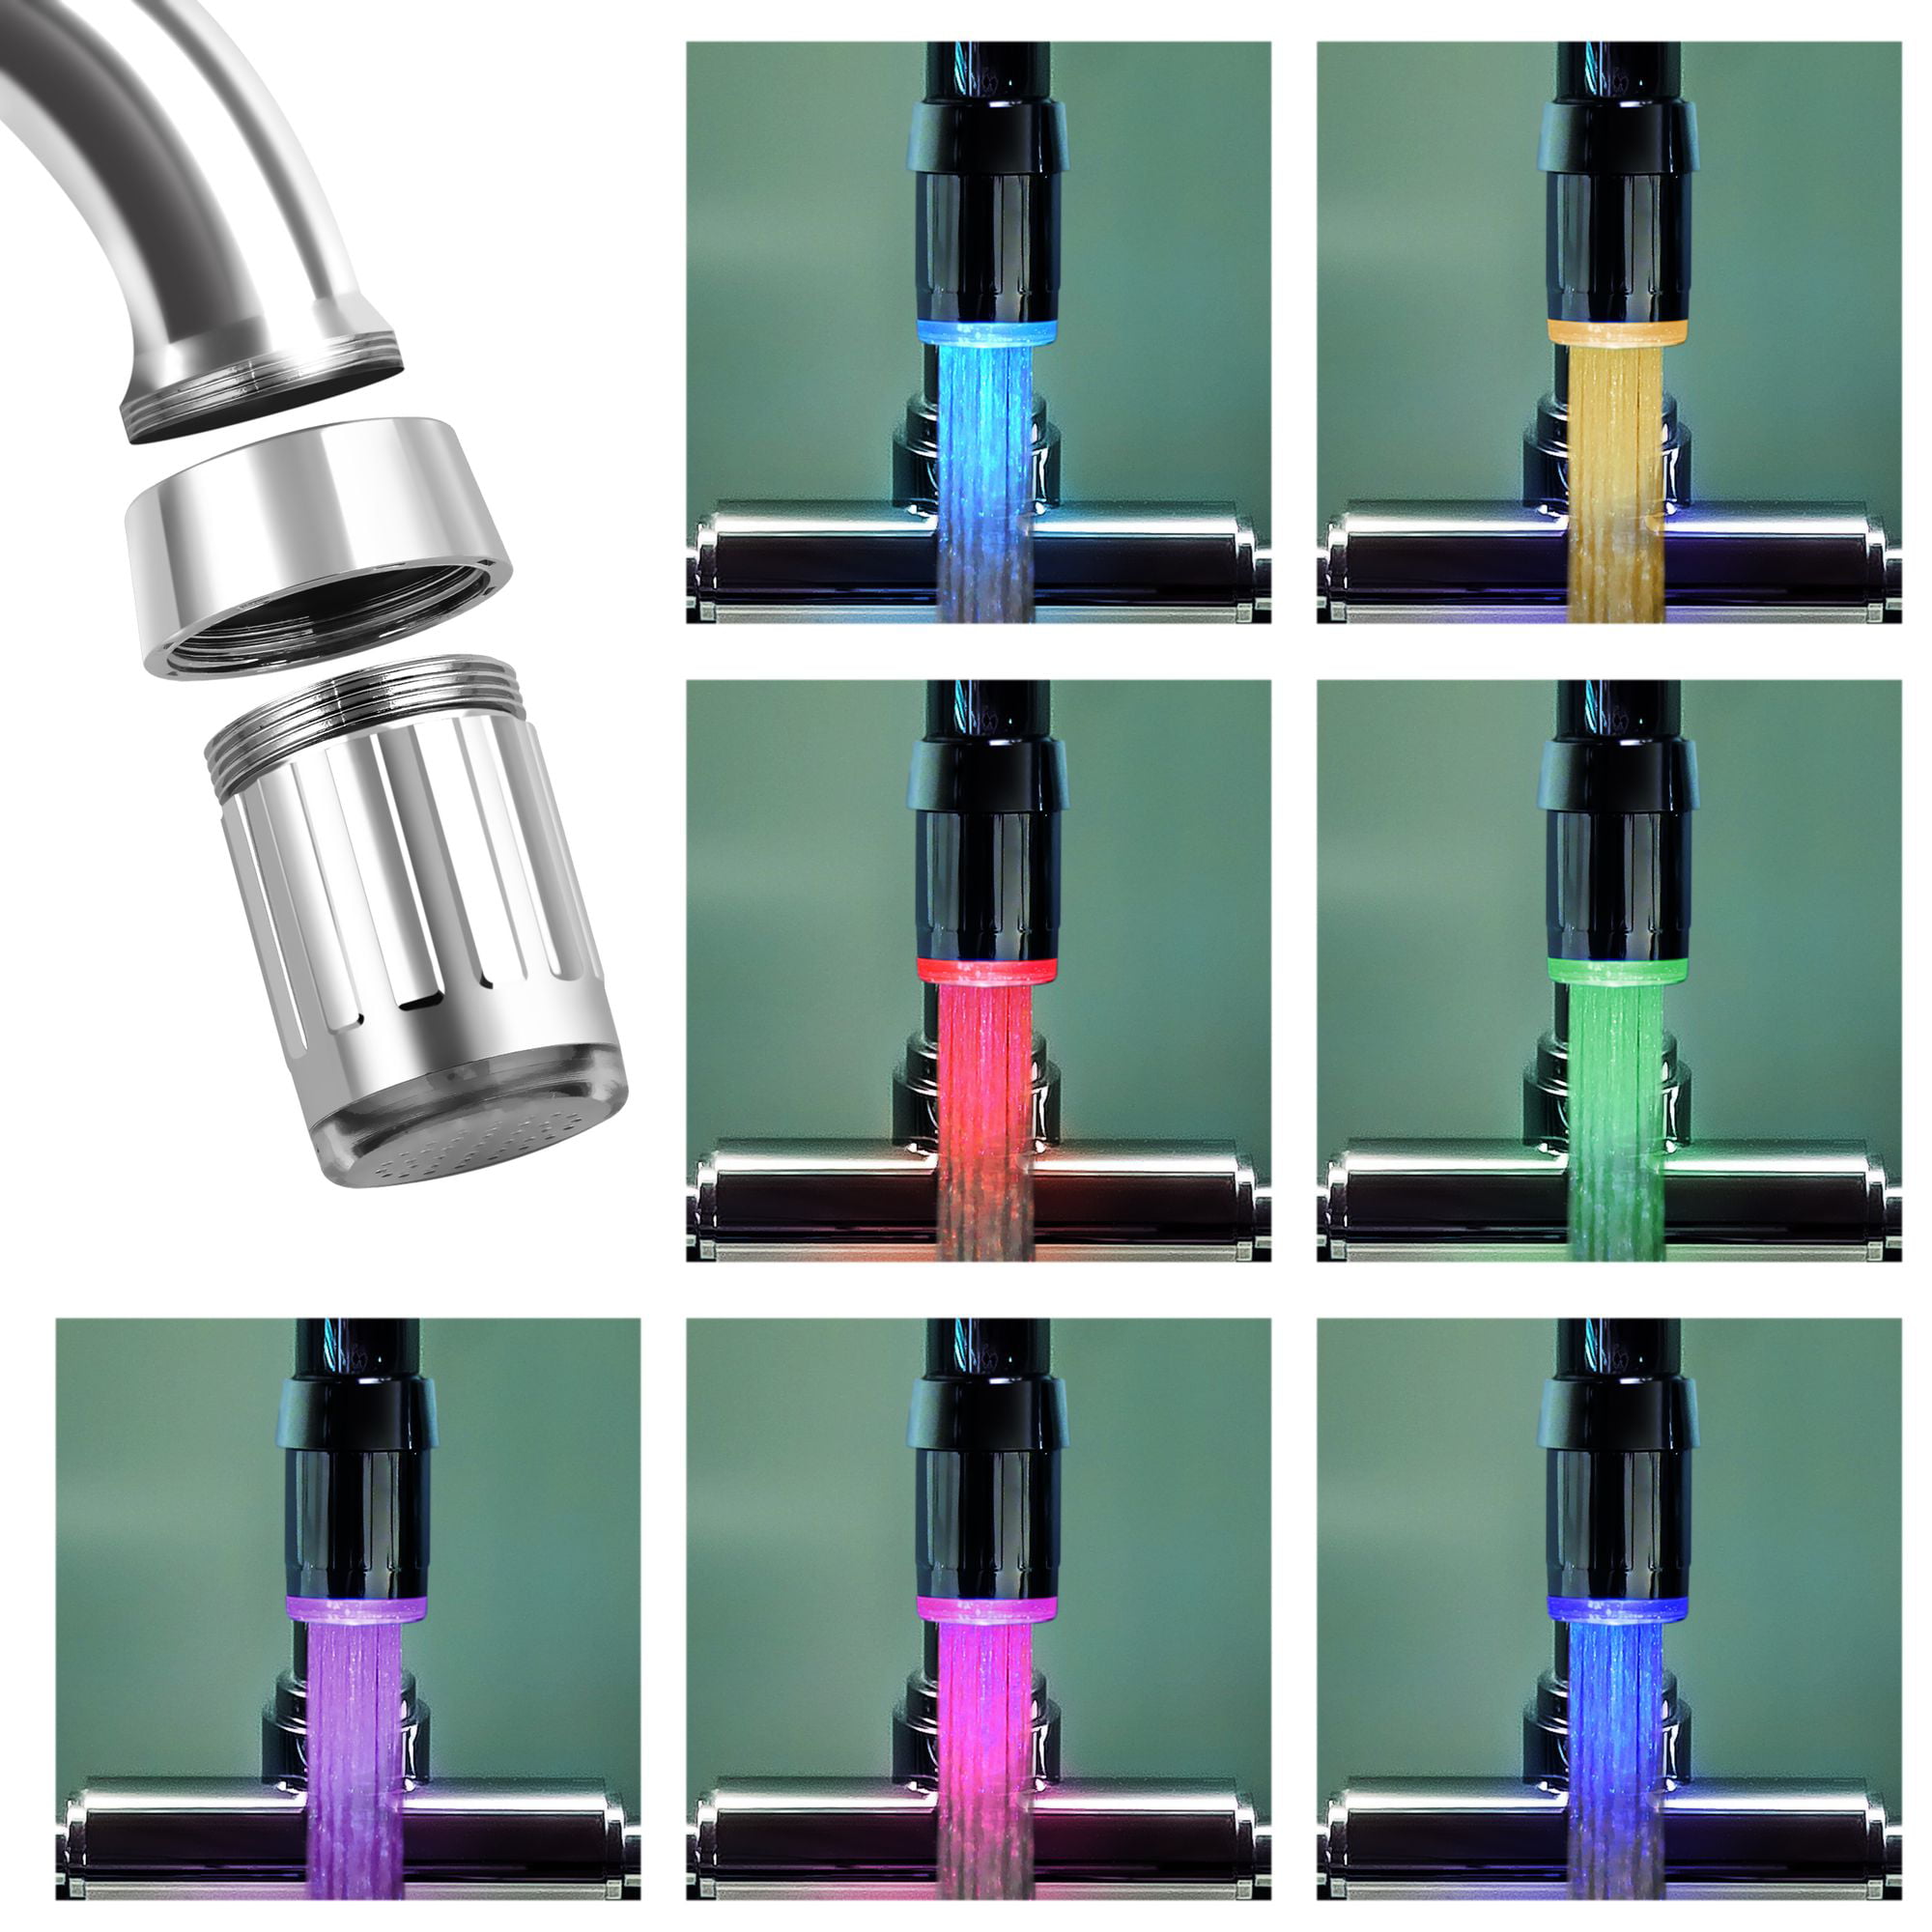 Insten Automatic Changing Led Water Faucet Stream Light 7 Colors